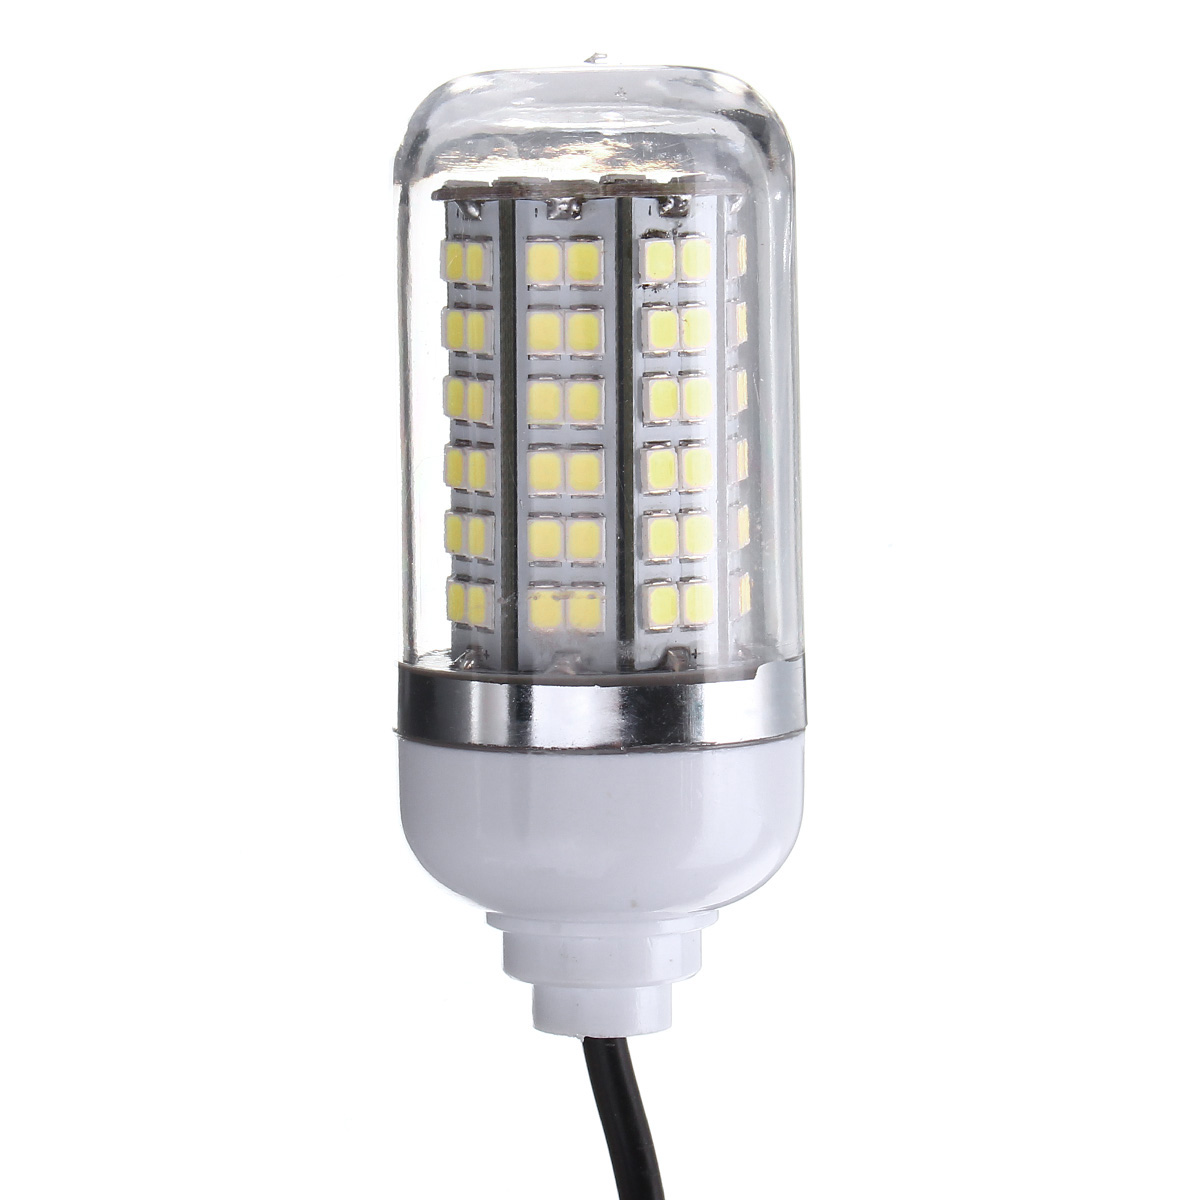 DC12V-7W-SMD2835-108-Underwater-LED-Fishing-Night-Boat-Attracts-Fish-Squid-Light-Bulb-with-Switch-1276984-5